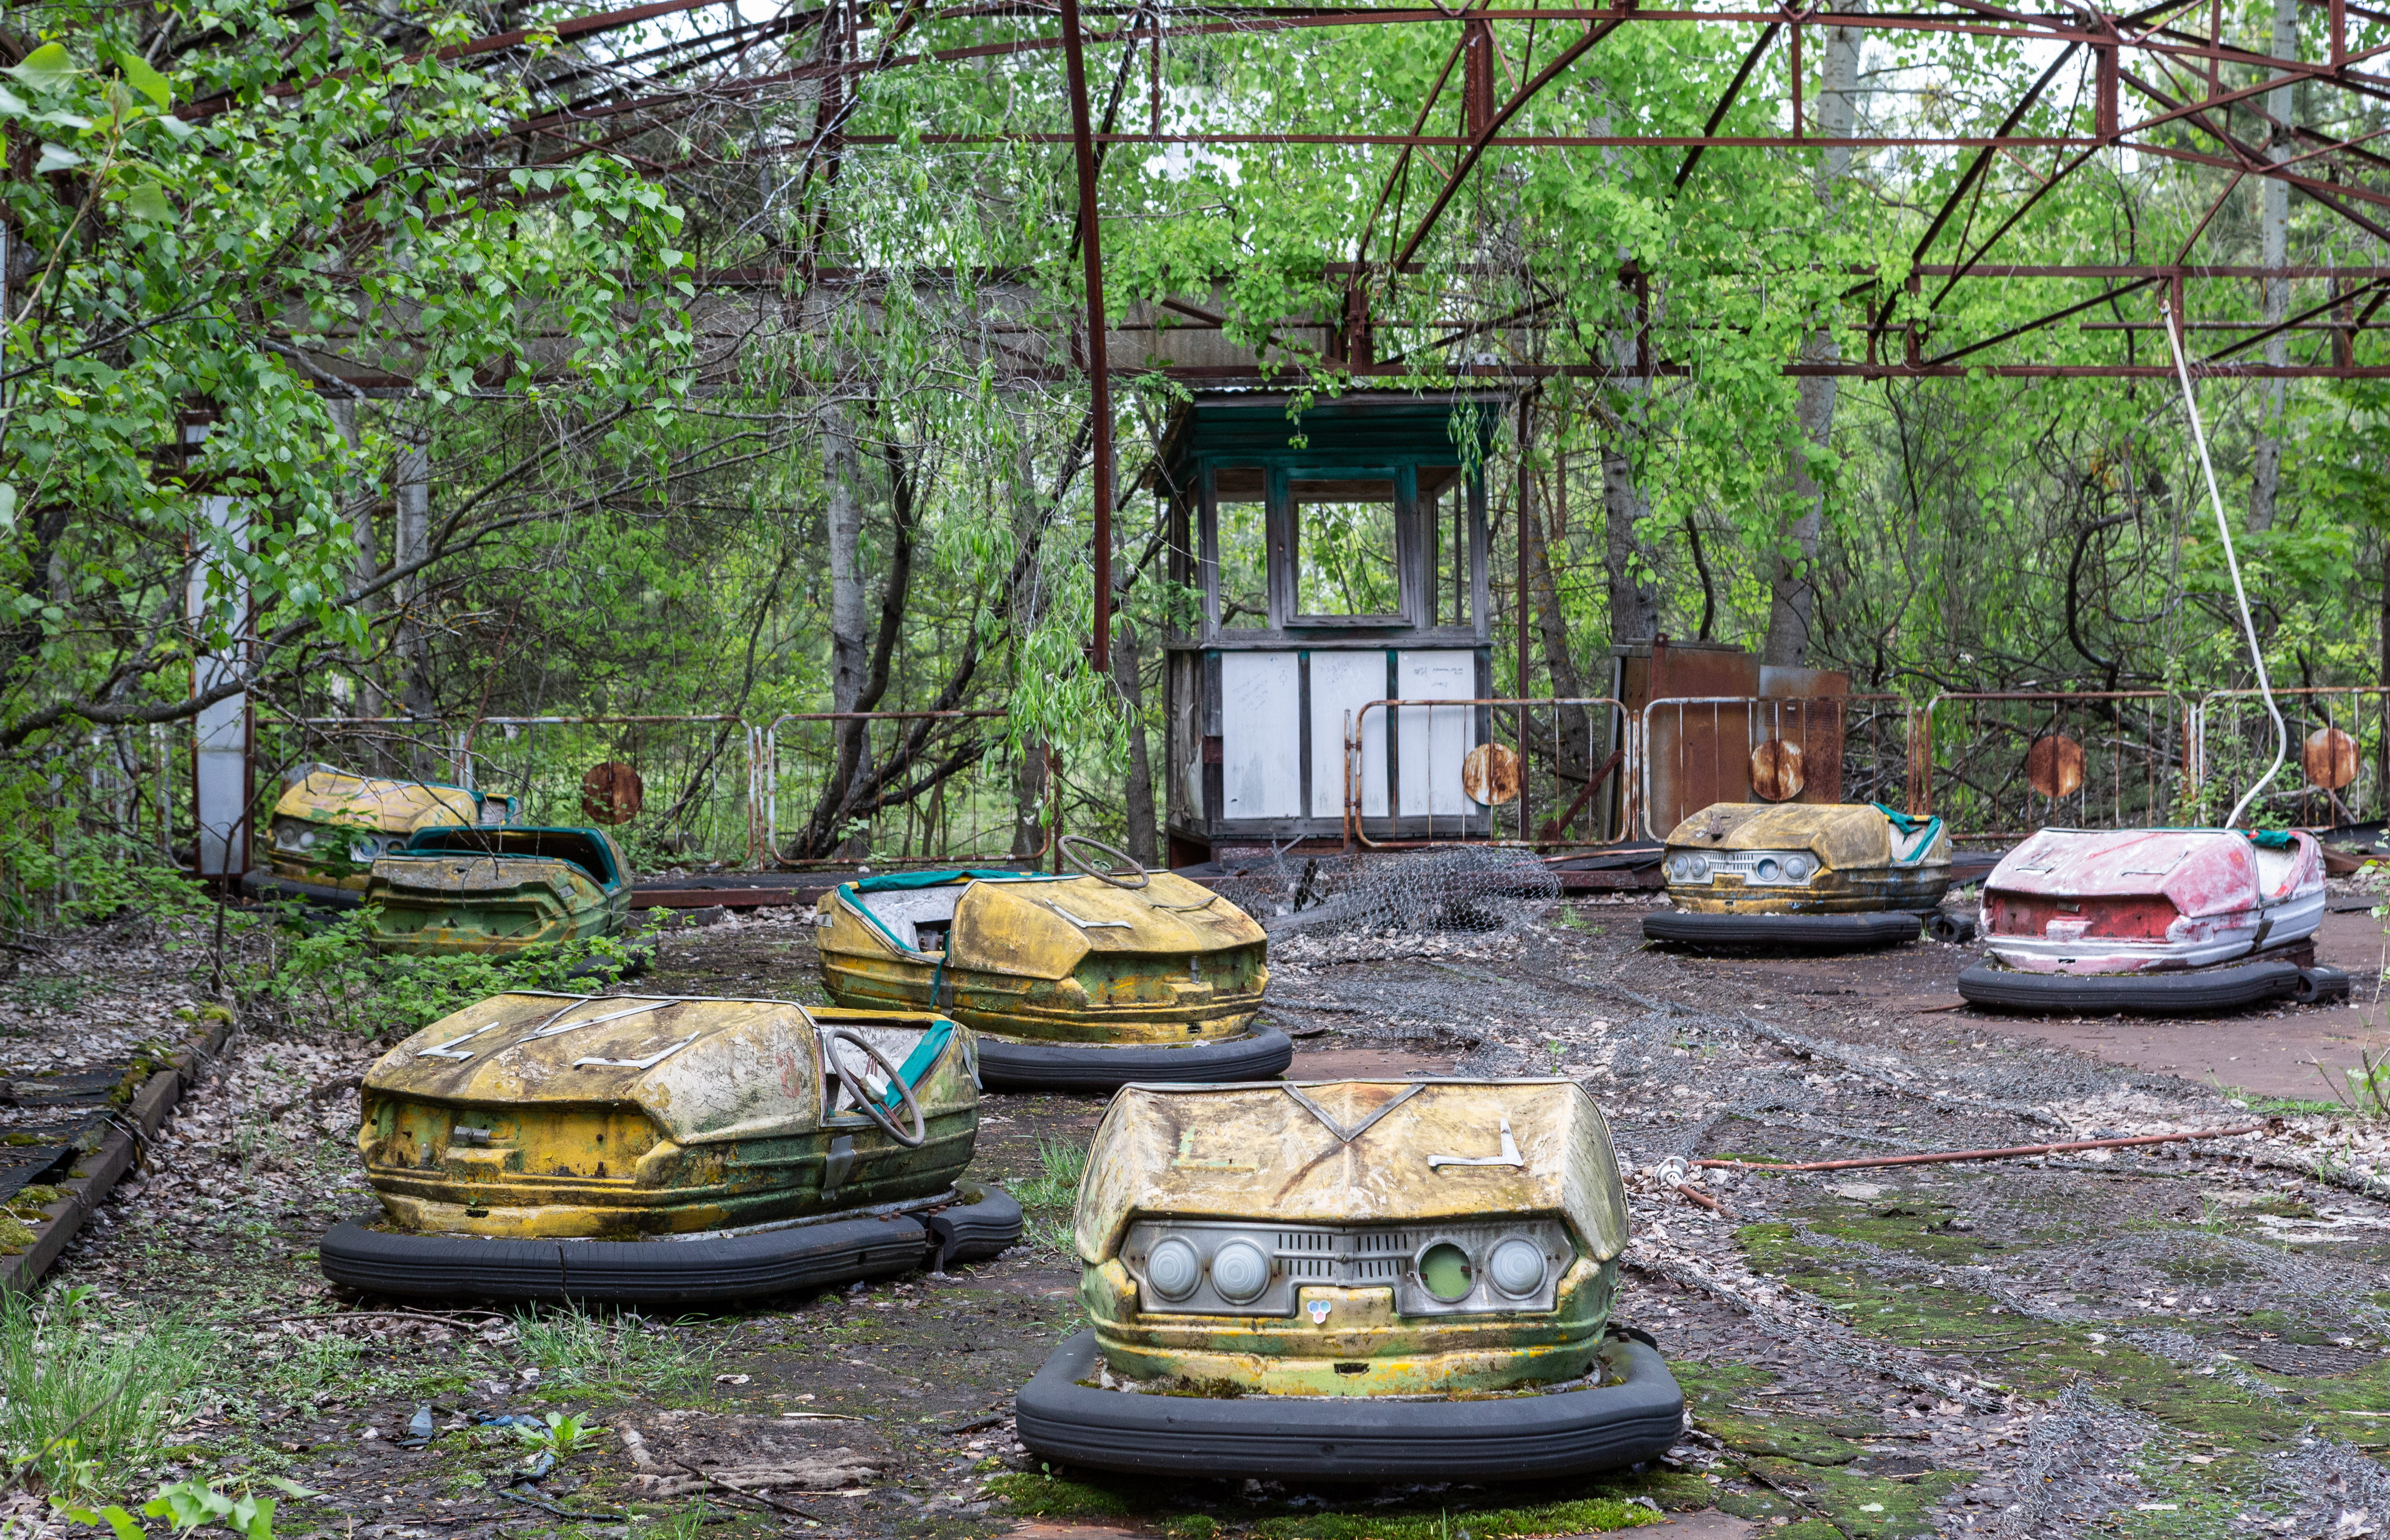 The abandoned bumper cars haven't moved in almost 40 years